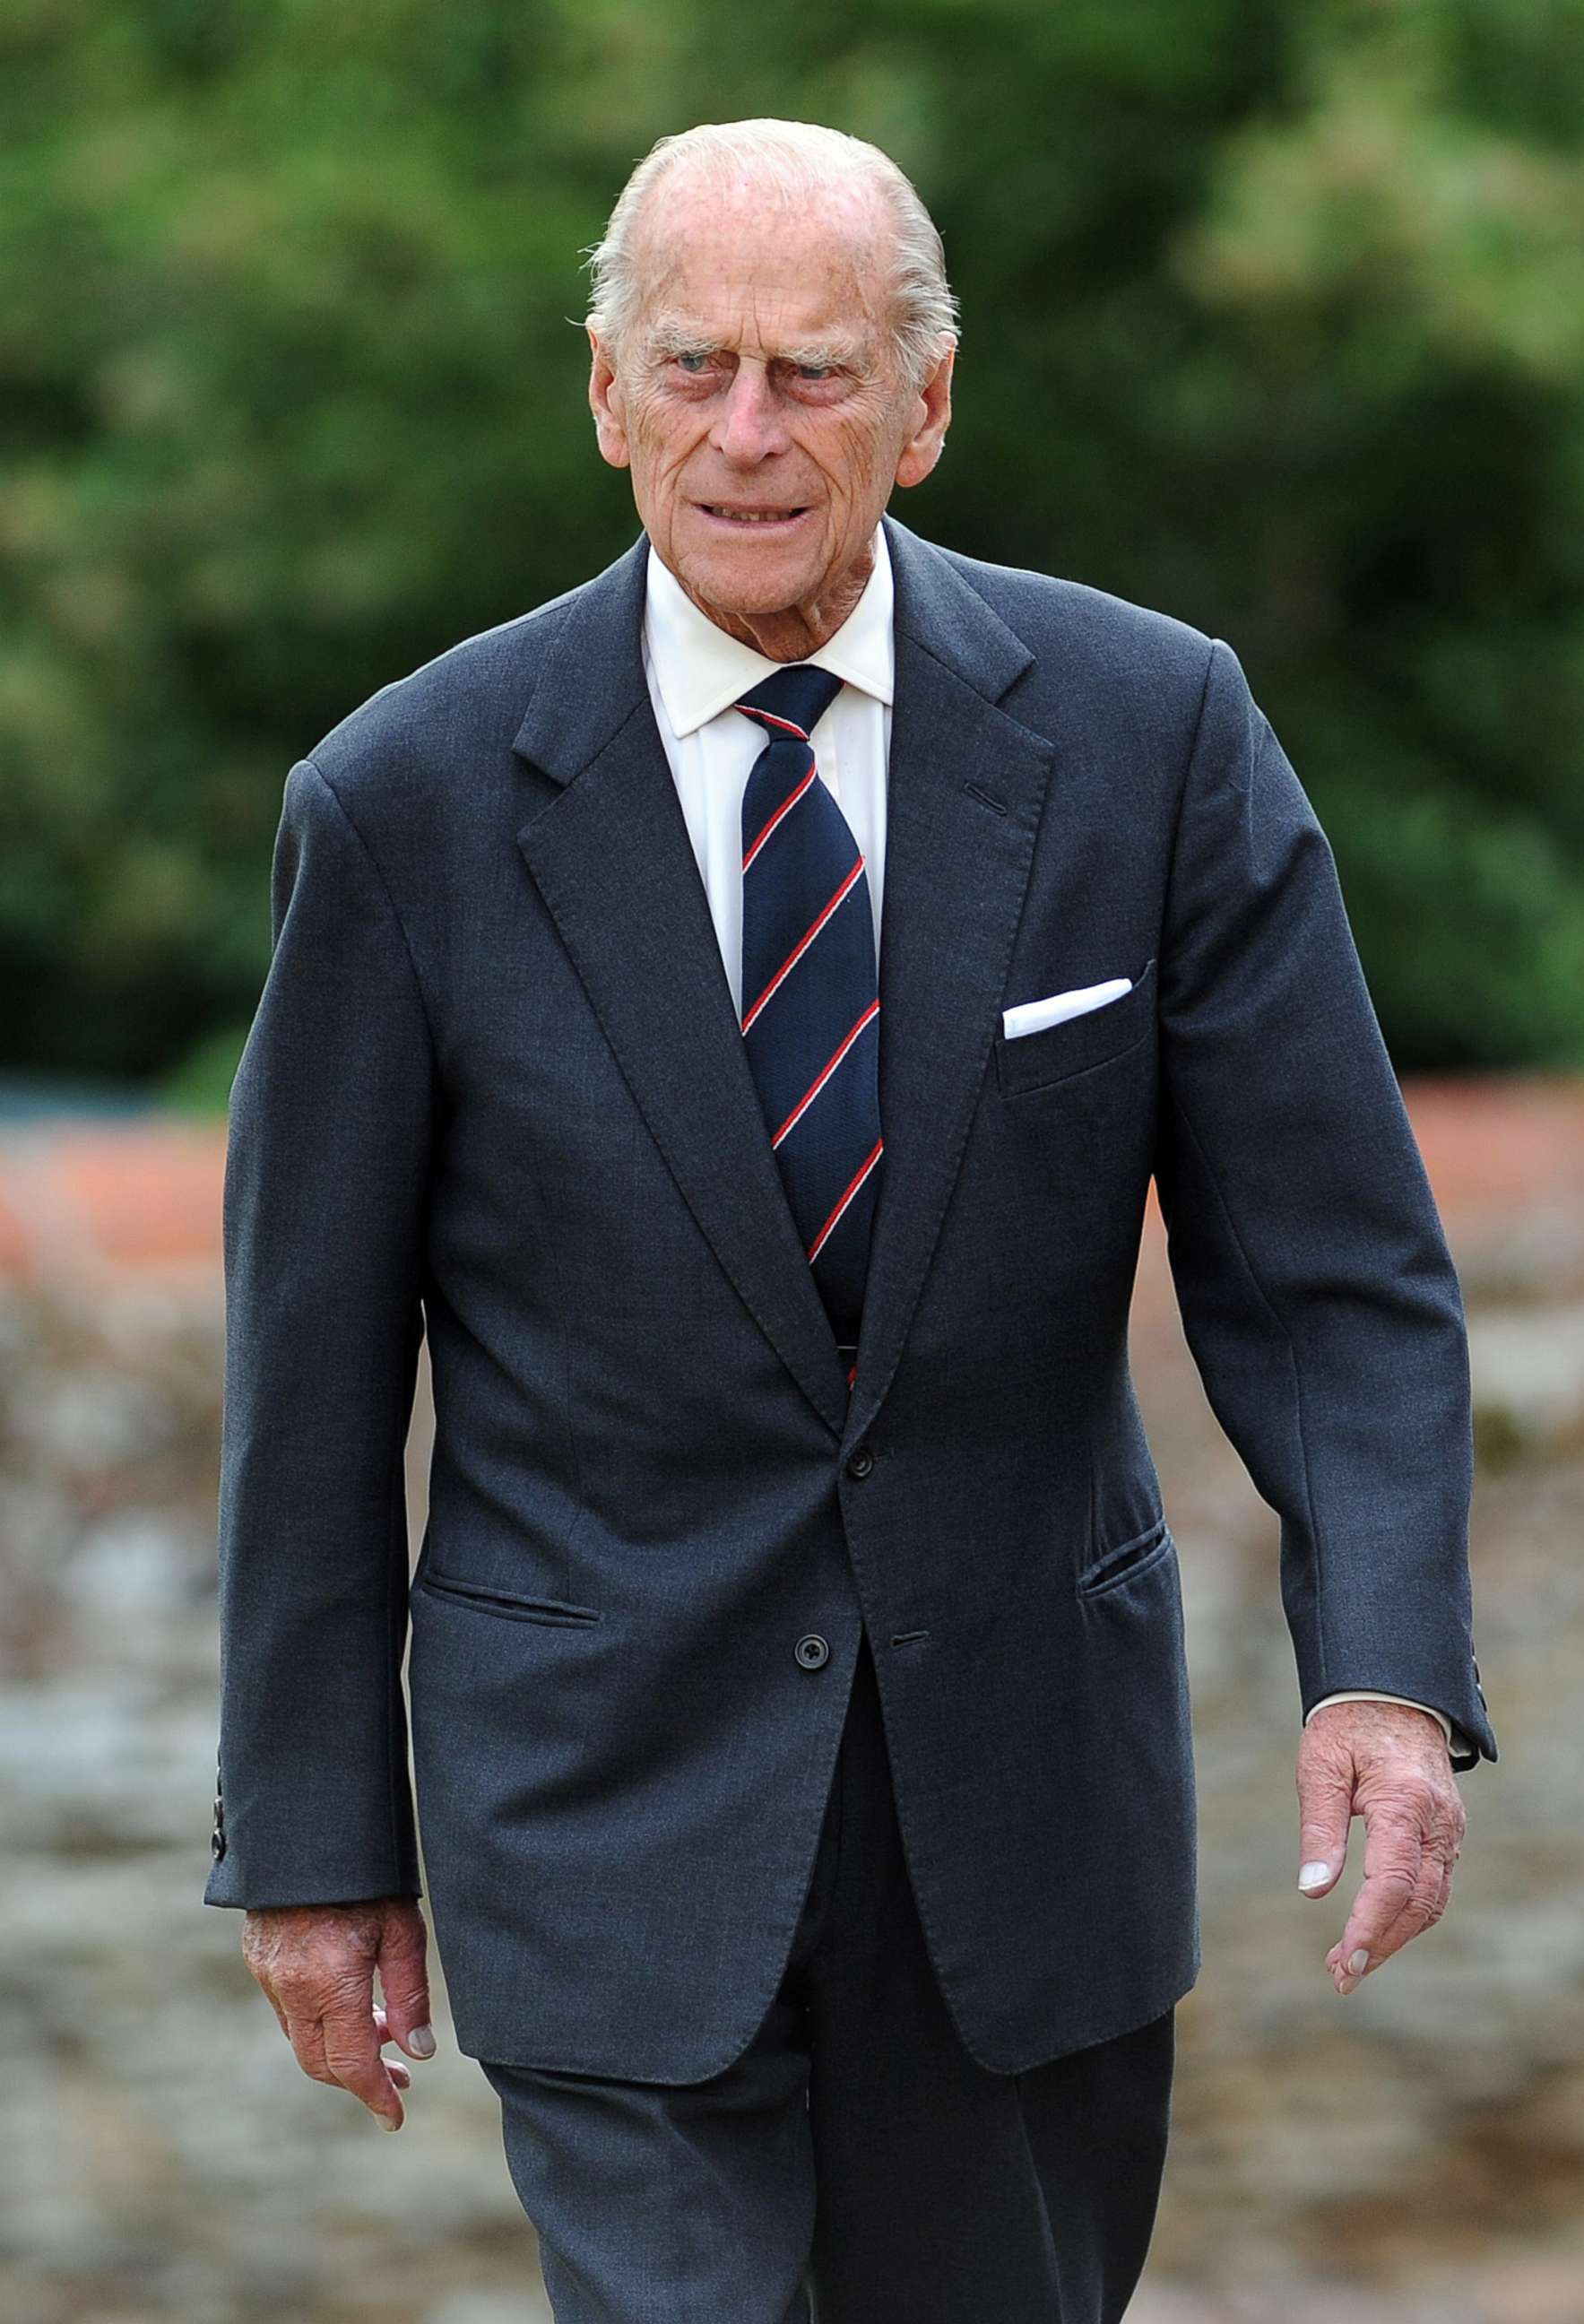 PHOTO: Prince Philip, Duke Of Edinburgh attends a service of commemoration at Sandringham Church on Aug. 4, 2014 in King's Lynn tot mark the 100th anniversary of Great Britain declaring war on Germany.